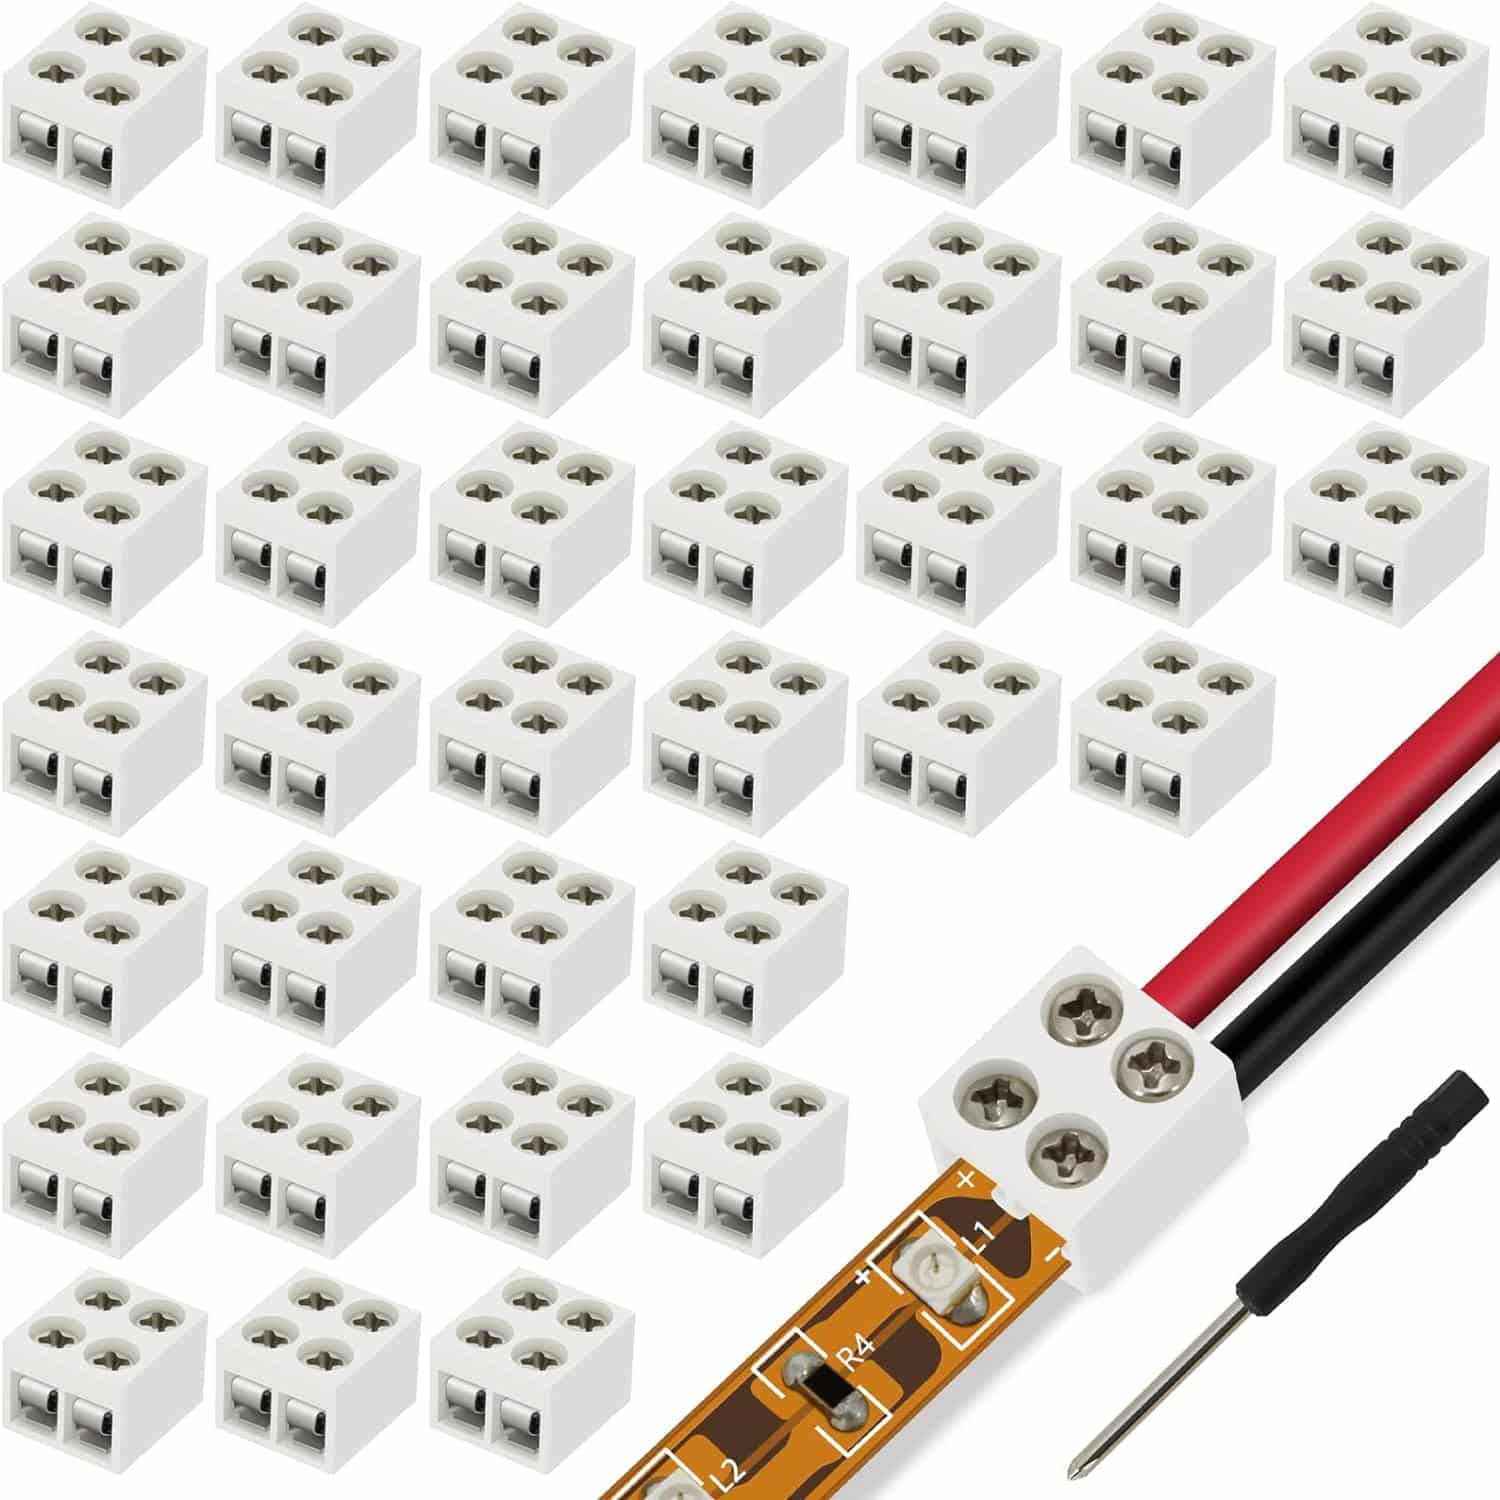 TTzycc 60 Pieces Solderless led Tape Light connectors, 8mm 2 pin led Connector, Wire for 5v 12v 24v Single Color LED Strip Lights，White, Screwdriver Included